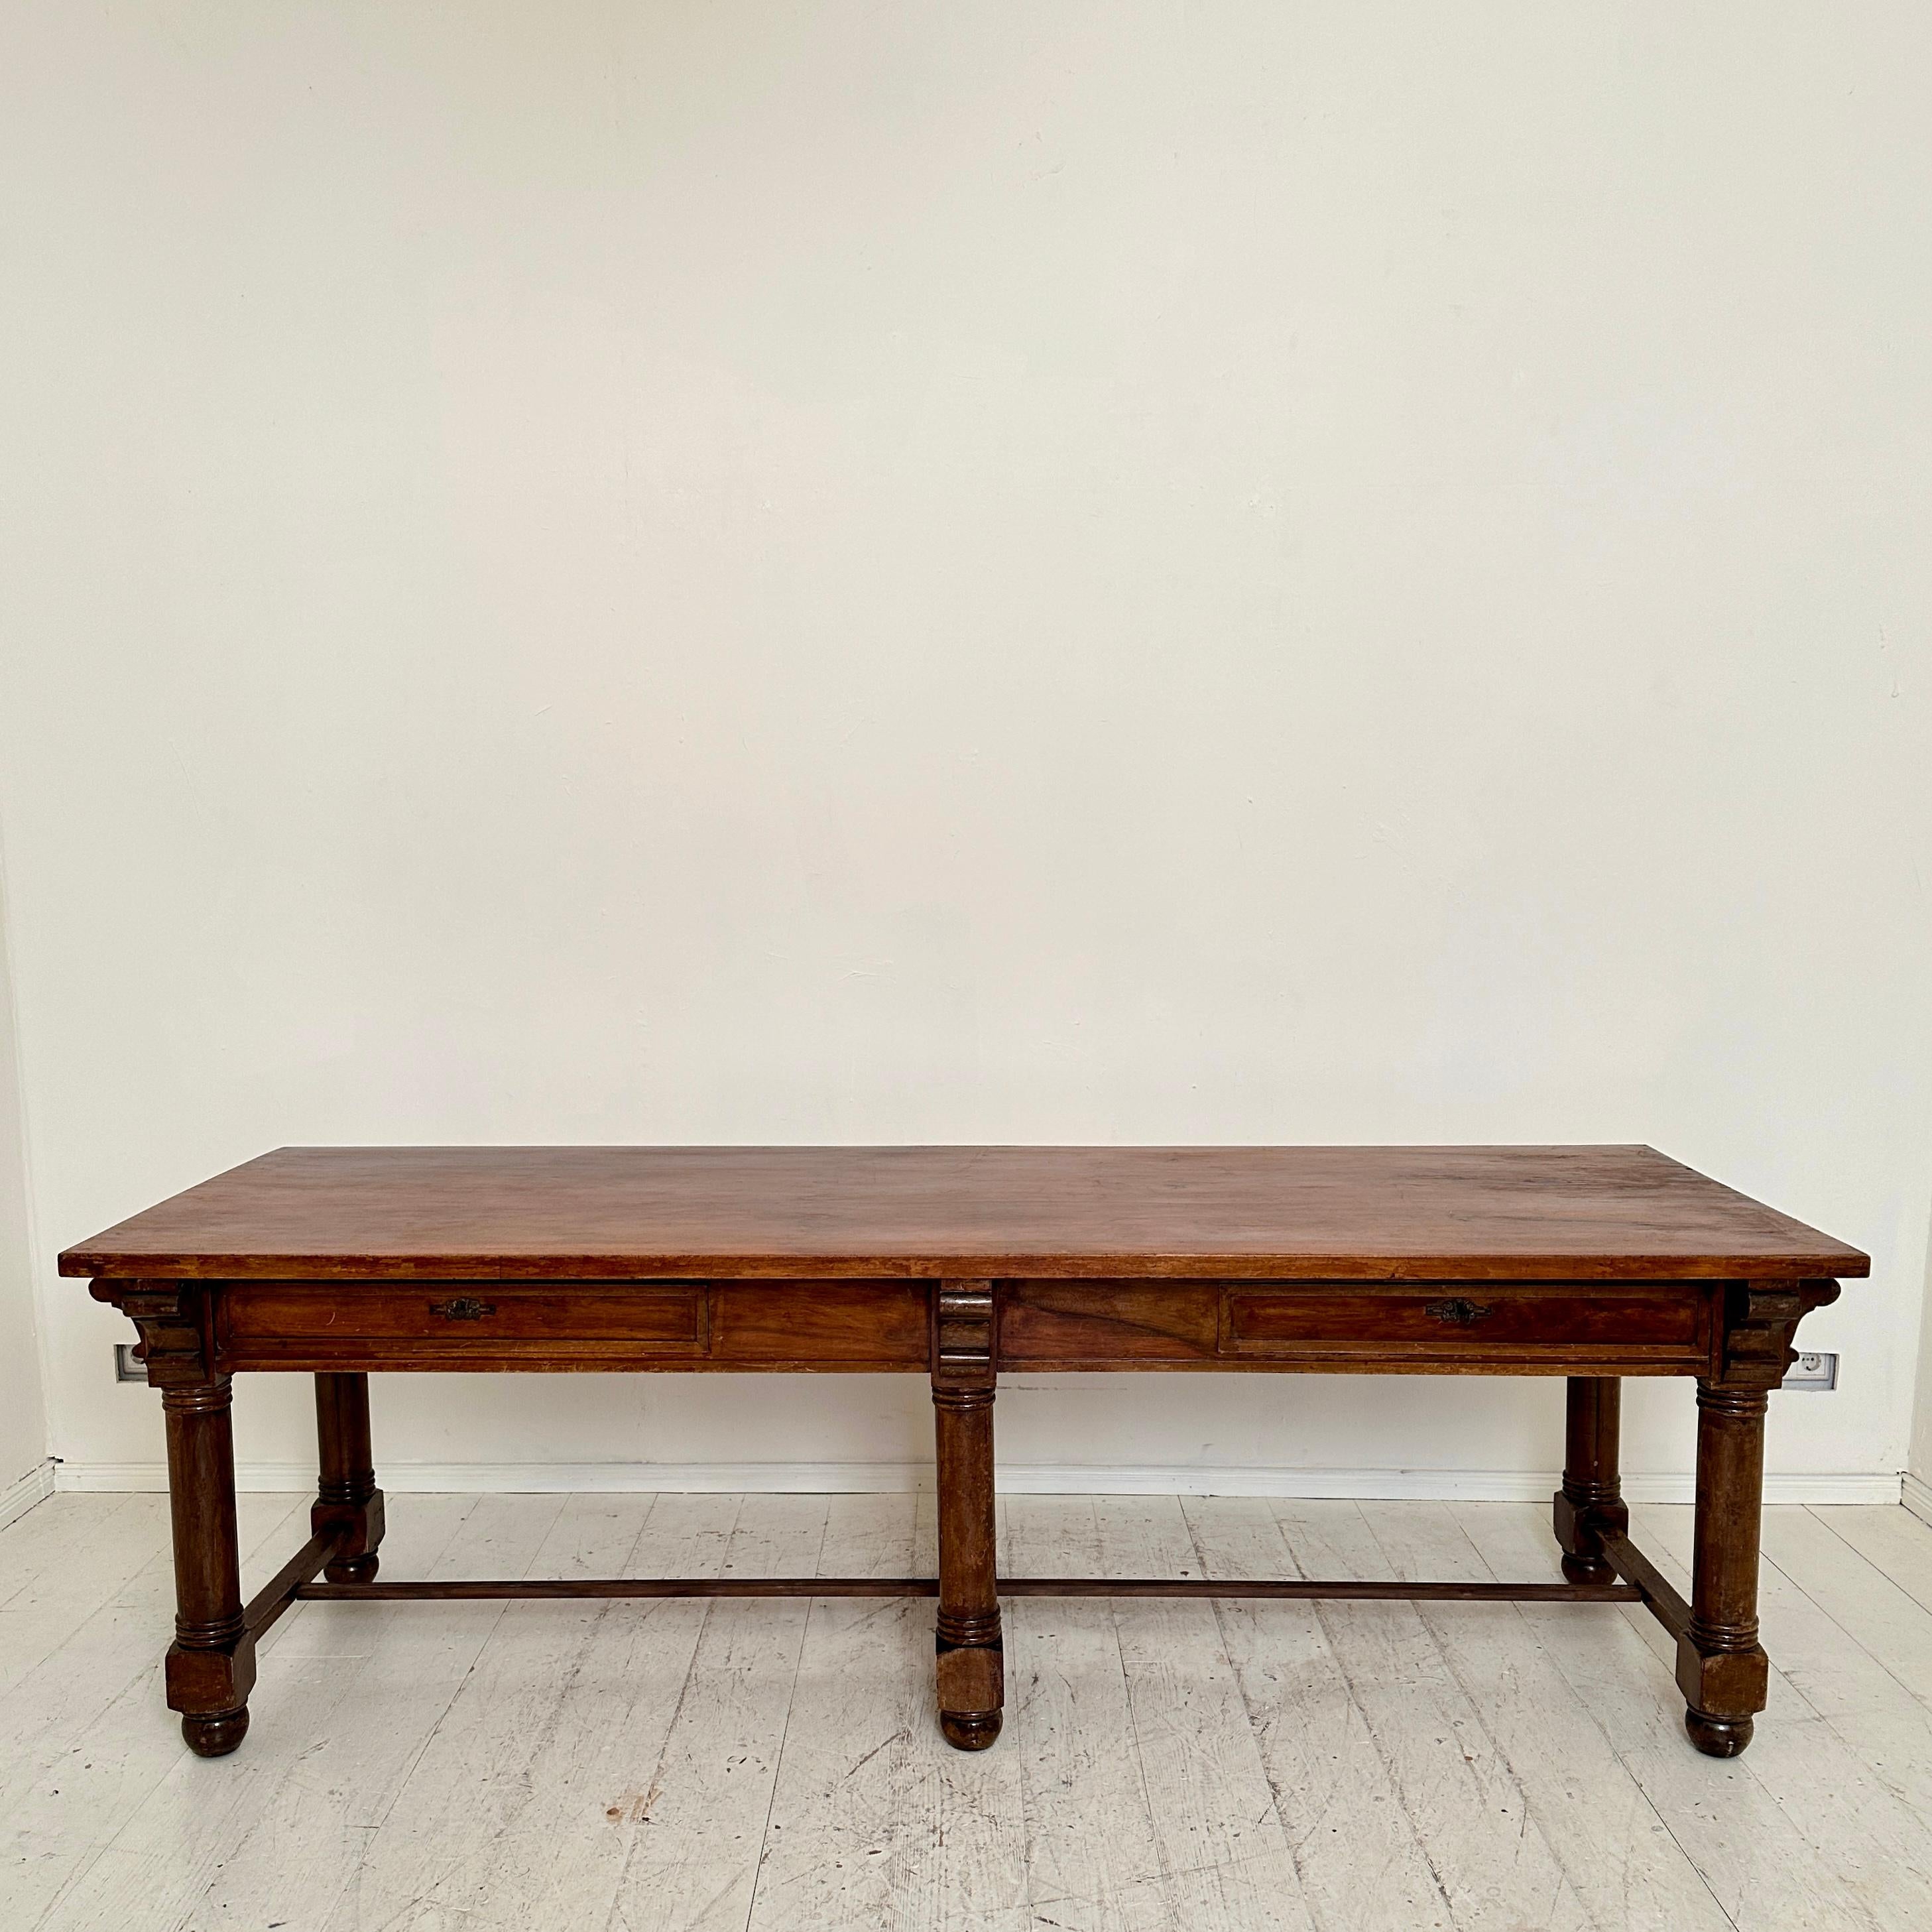 Transport yourself to the opulence of late 19th-century Italy with this exquisite dining table, a splendid relic from 1880. 
The base is crafted from rich brown solid walnut and the table top is veneered in walnut. 
The table emanates a timeless